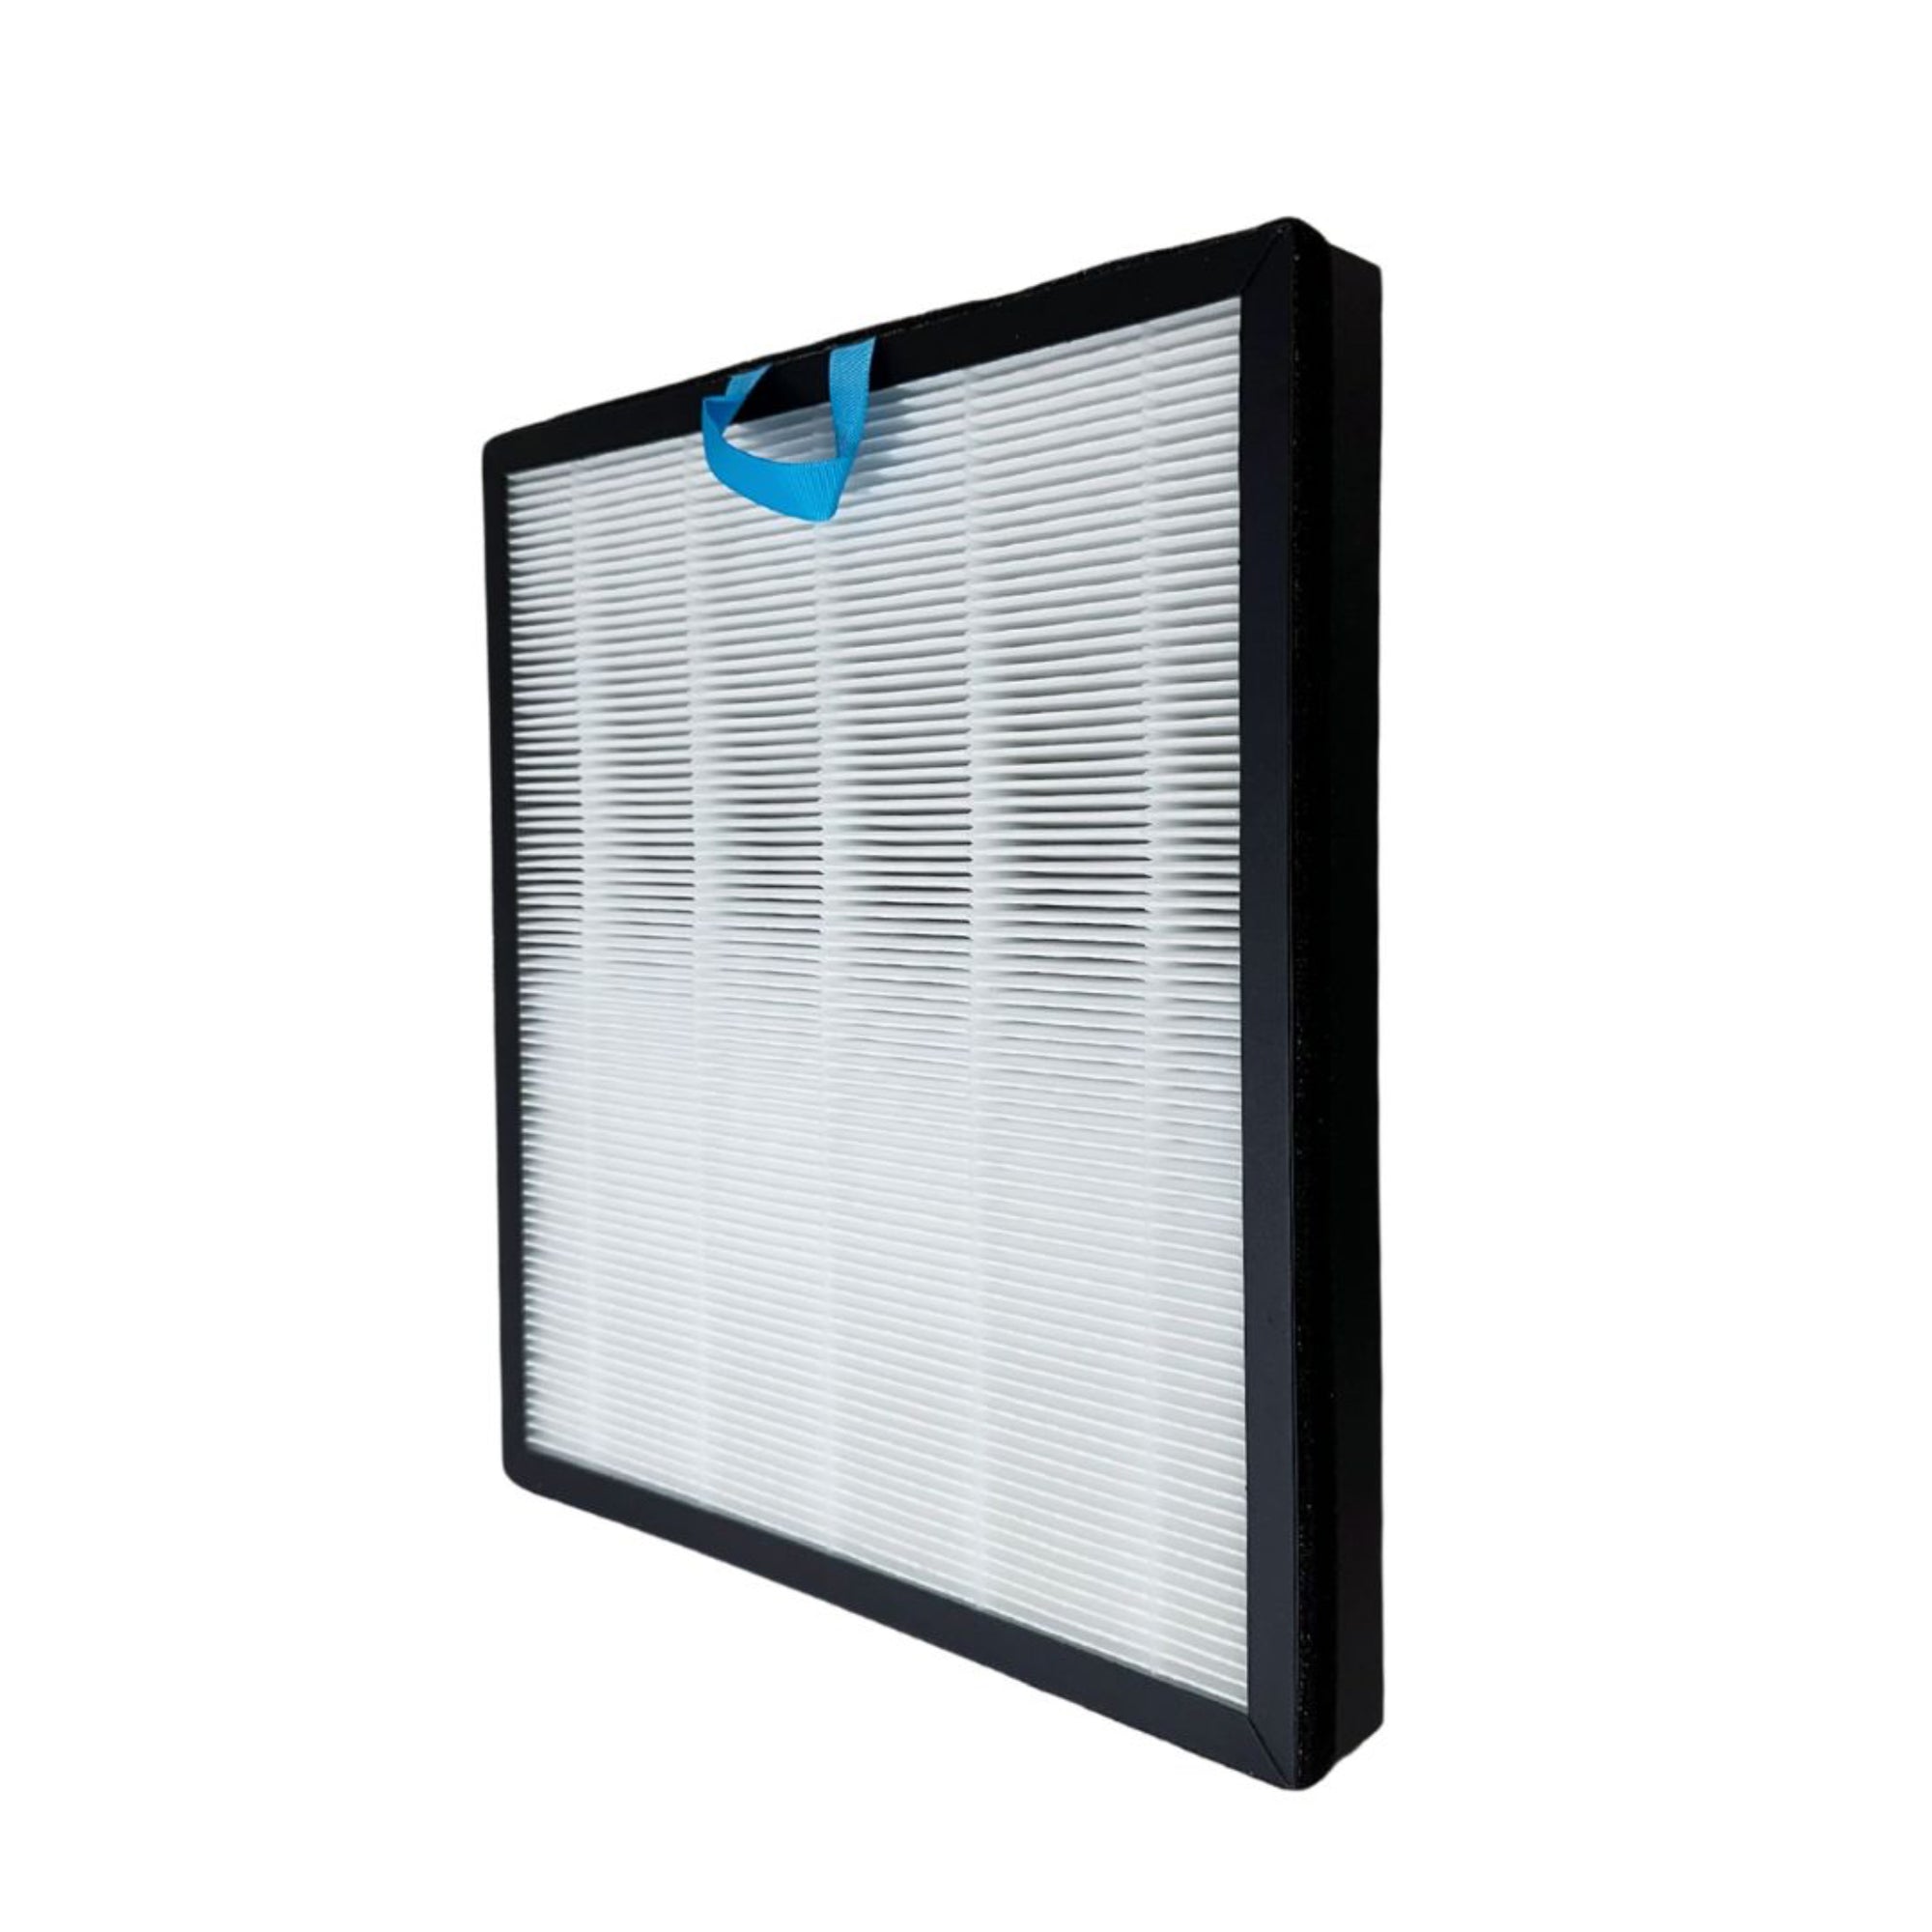 Nispira Vital 100S 2-In-1 True HEPA Filter Replacement Compatible with Levoit Air Purifier Part Vital 100S-RF